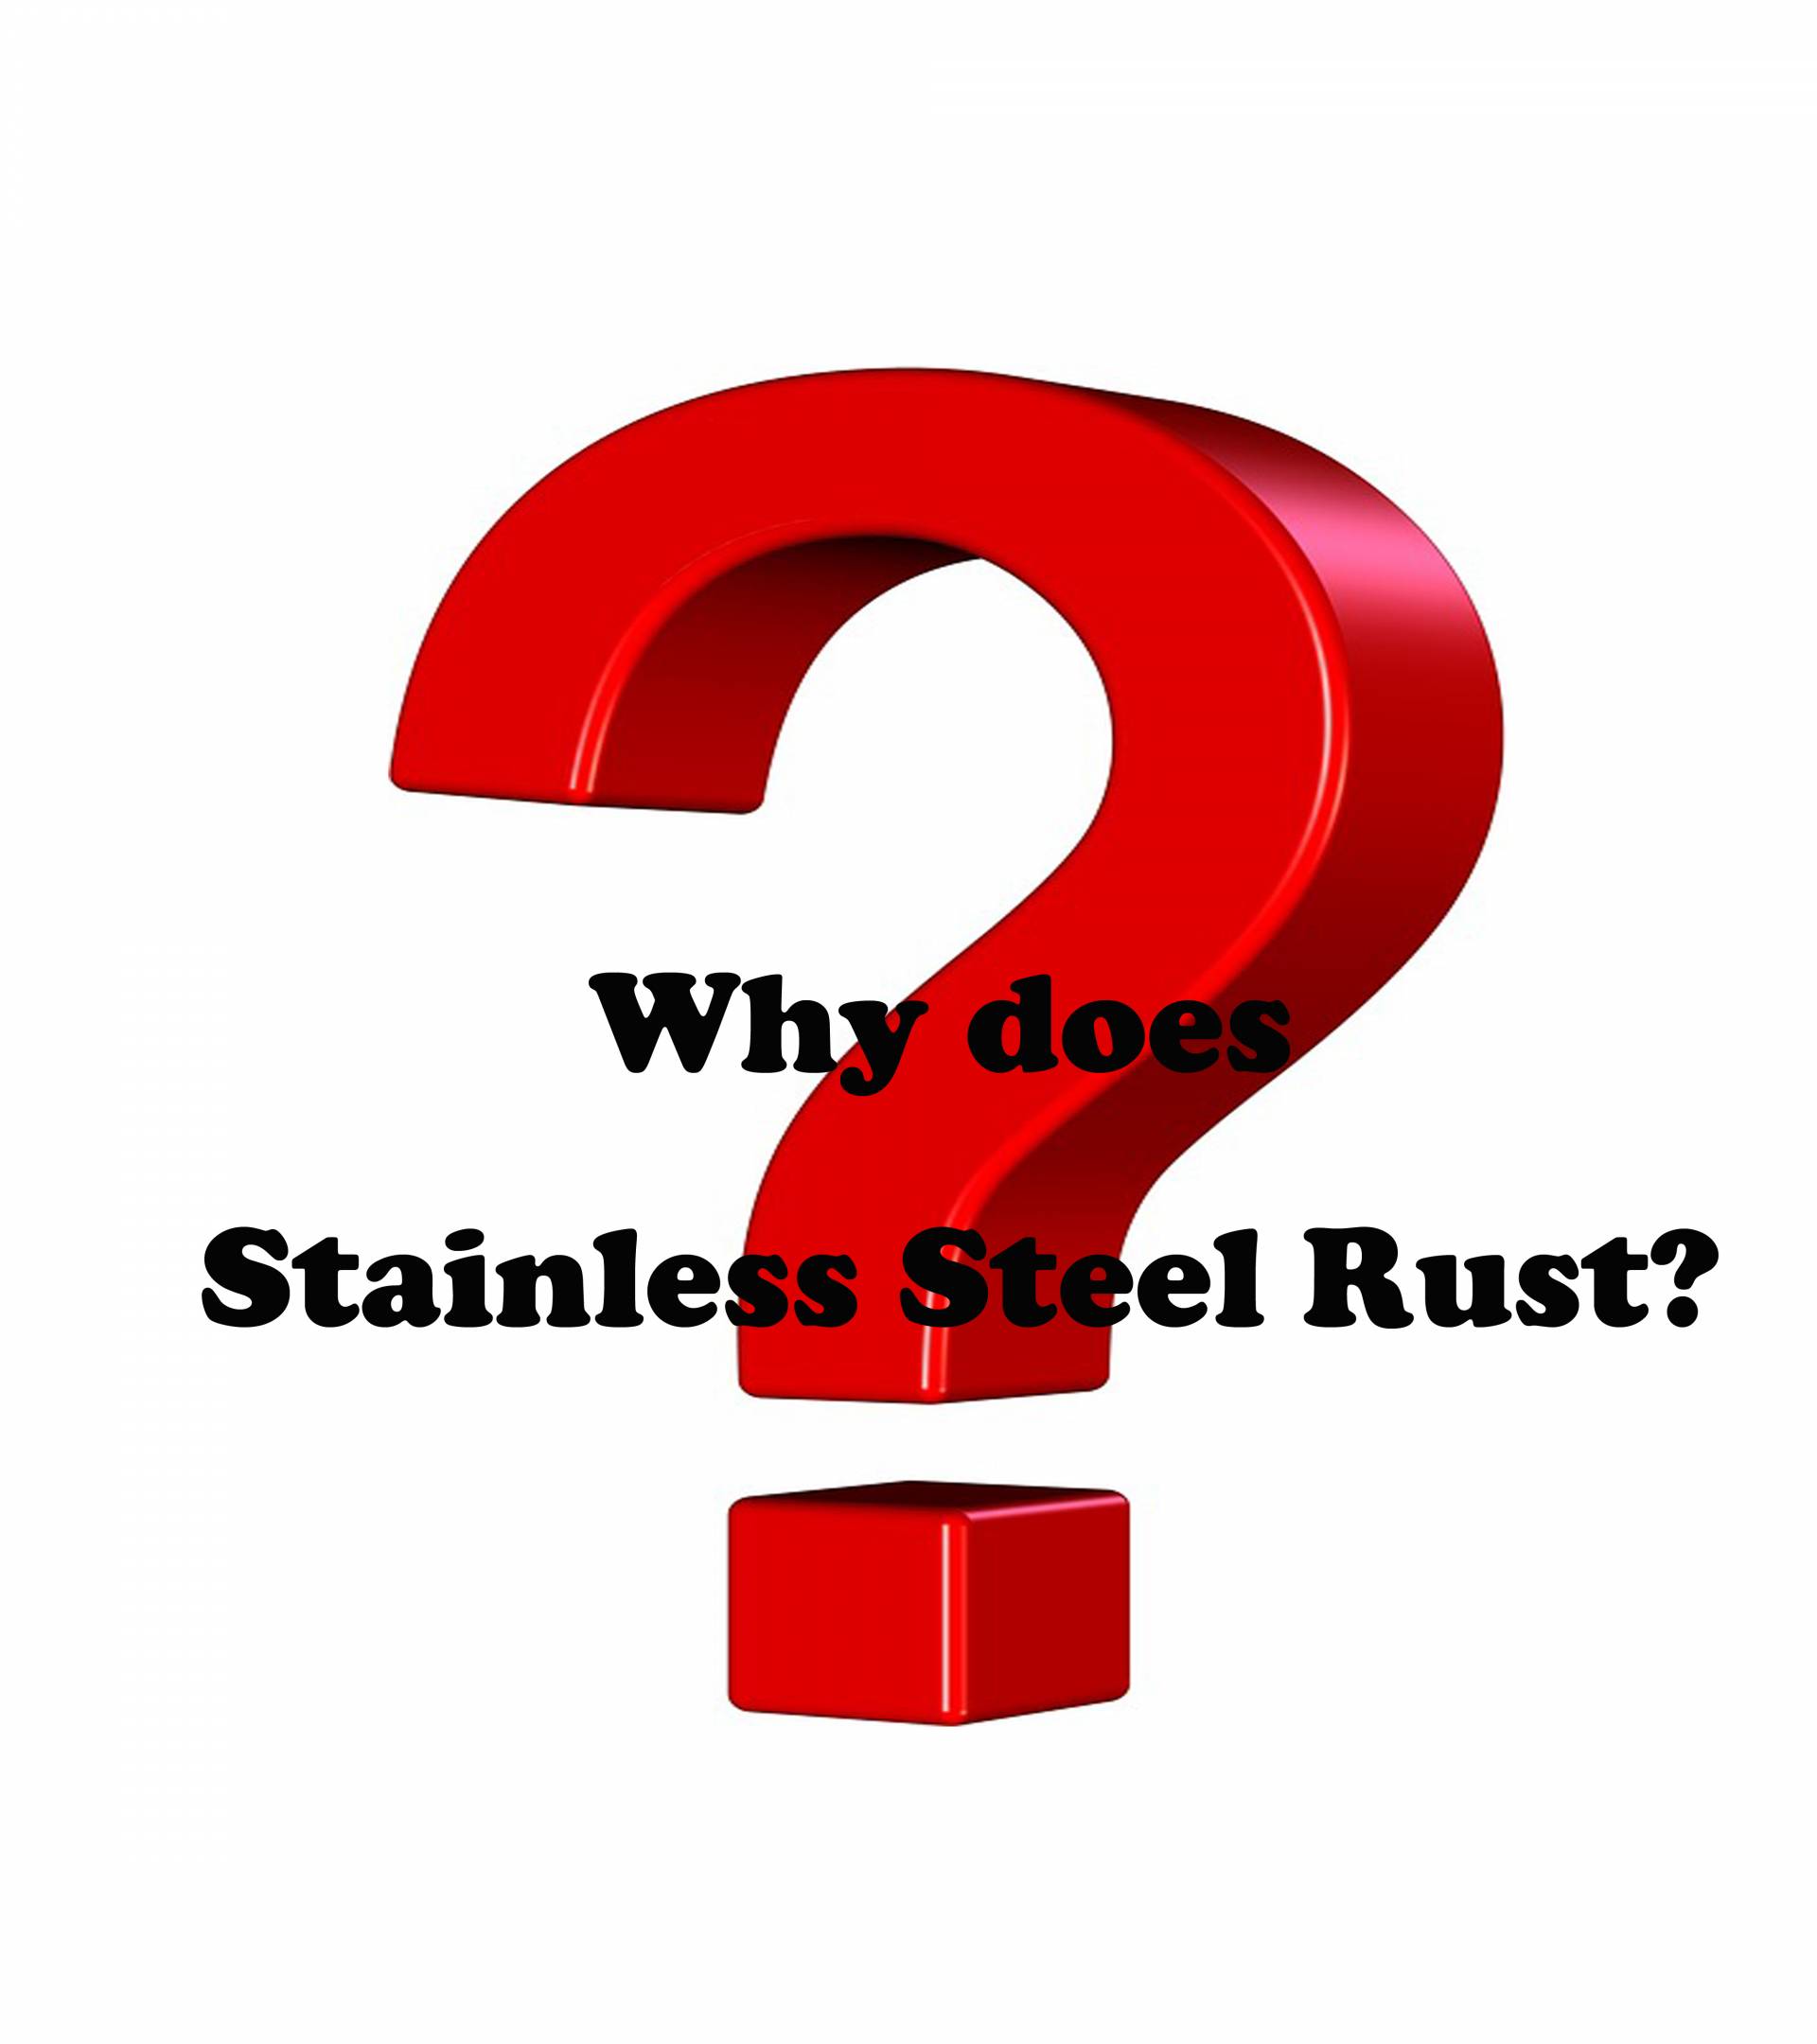 Why does Stainless Steel Rust?